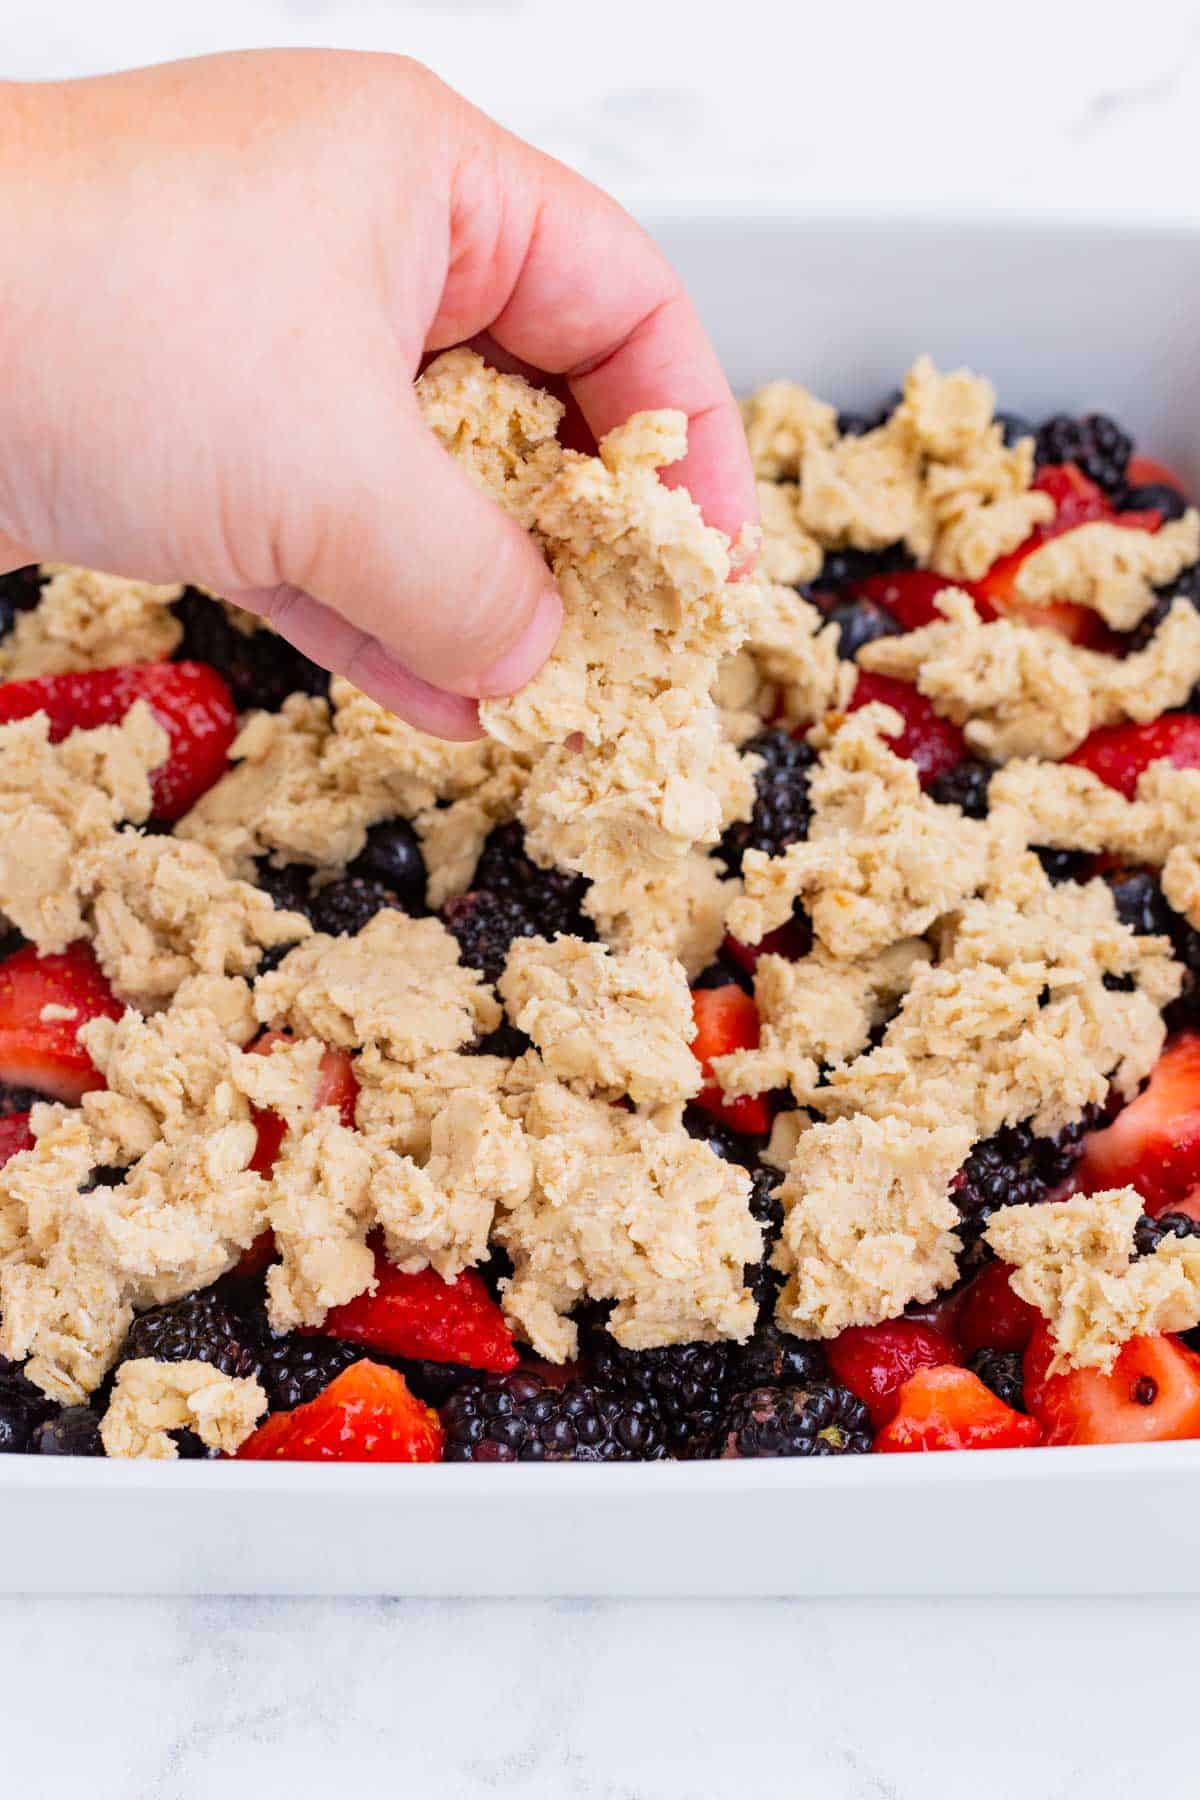 The remaining crumble mixture is spread over the berries.